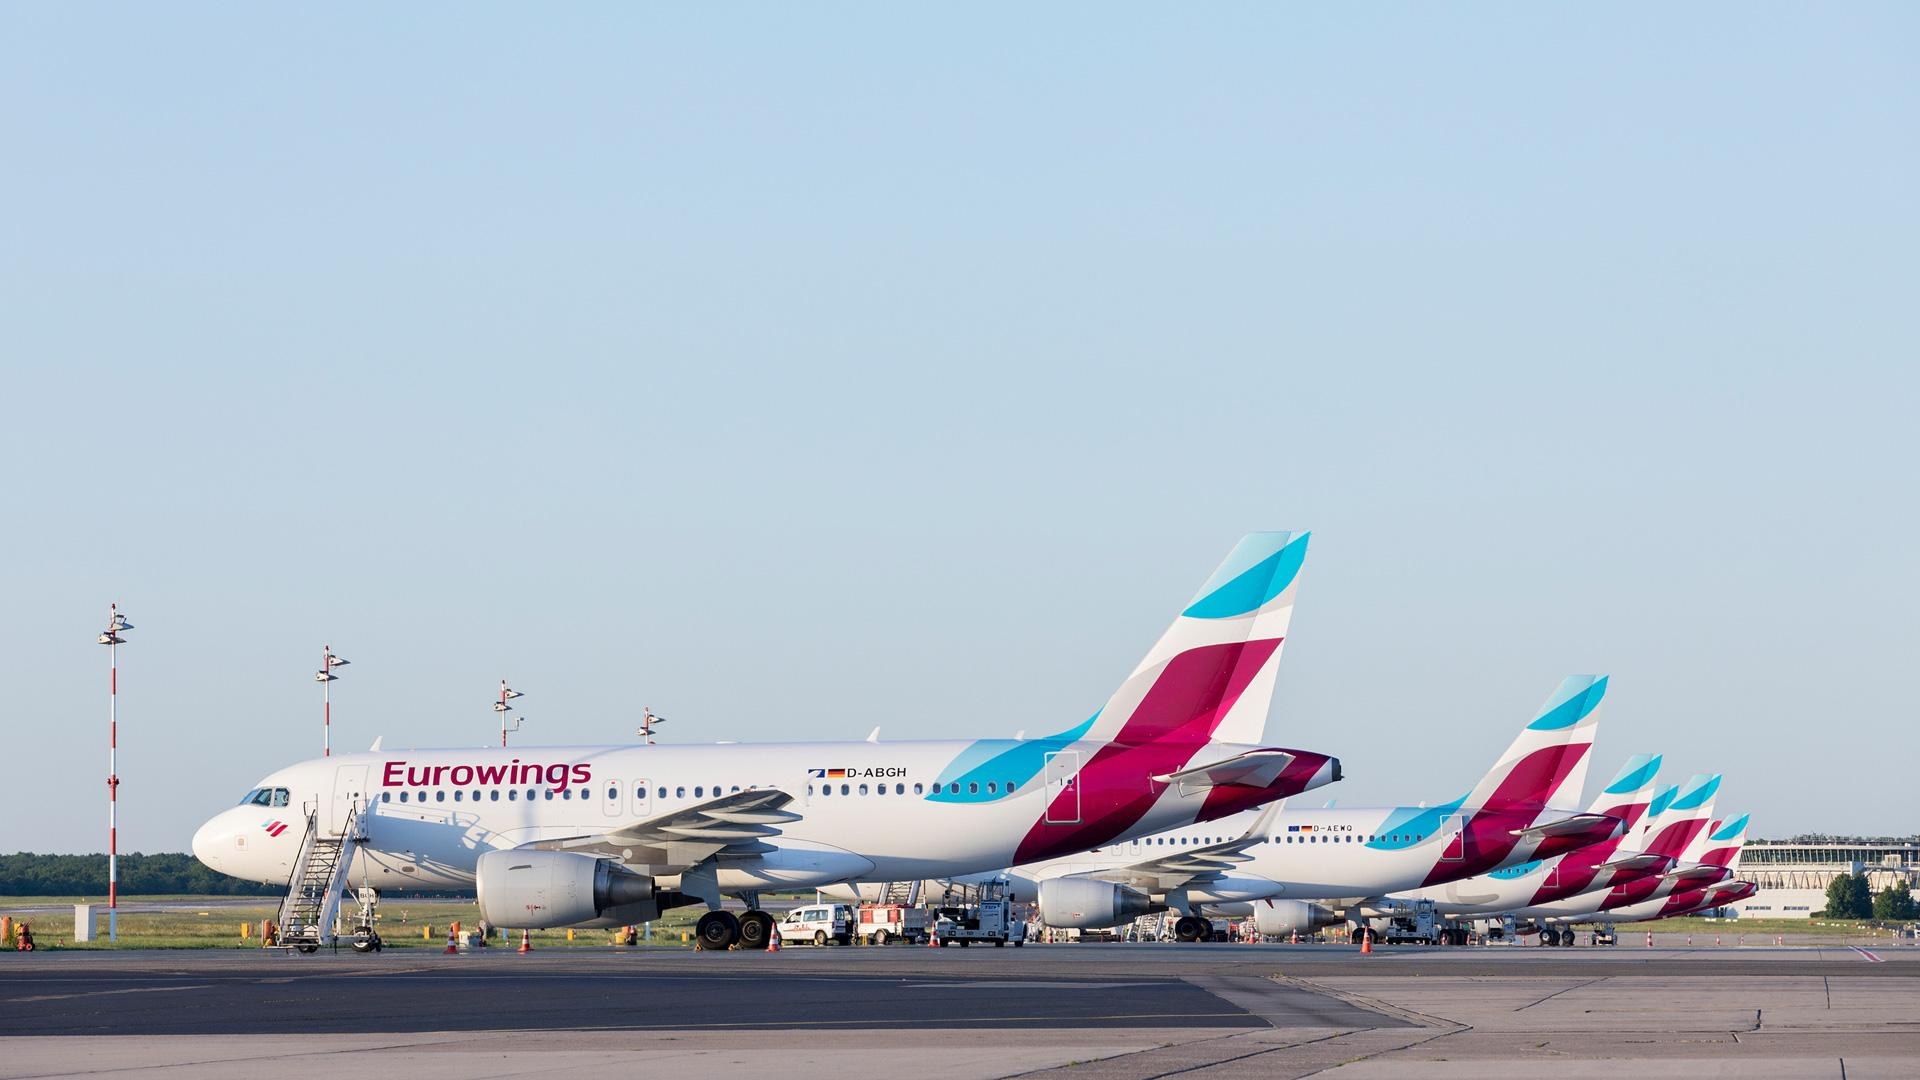 DLR Low Cost Monitor: Eurowings aircraft on the apron